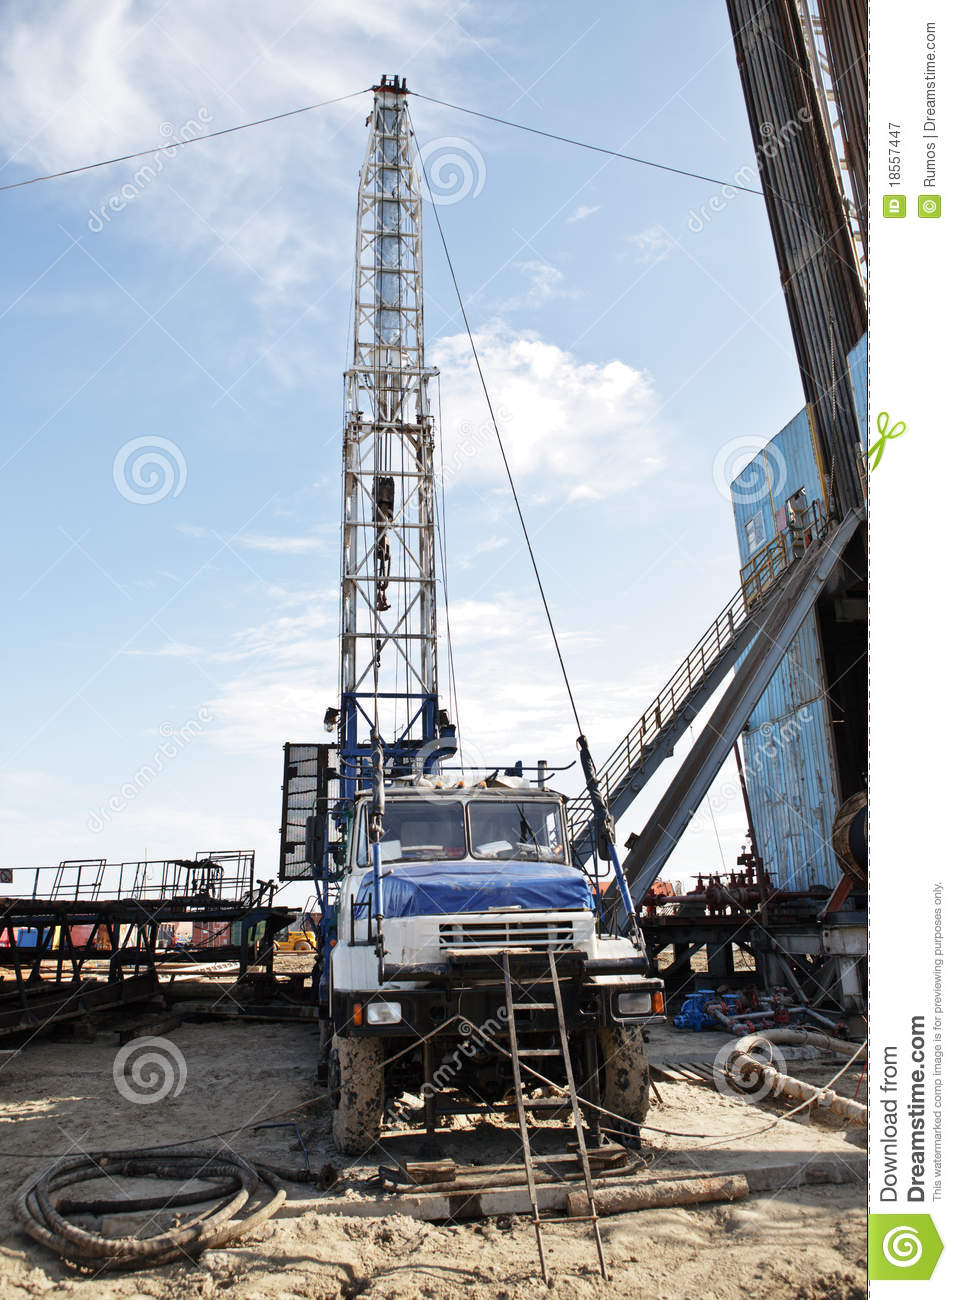 Workover Rig Royalty Free Stock Photography   Image  18557447